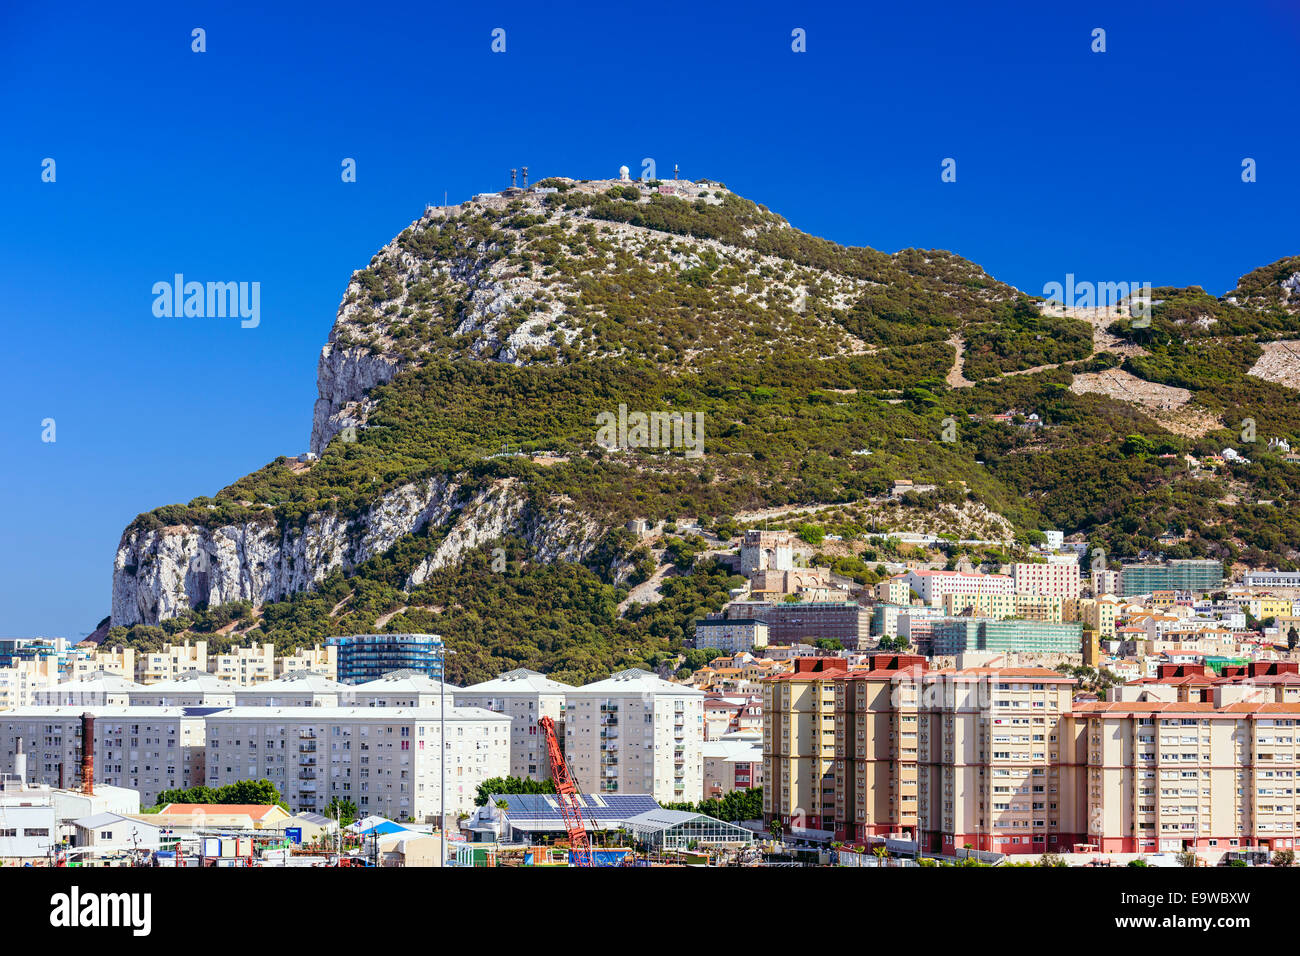 The British Overseas territory of the Rock of Gibraltar. Stock Photo